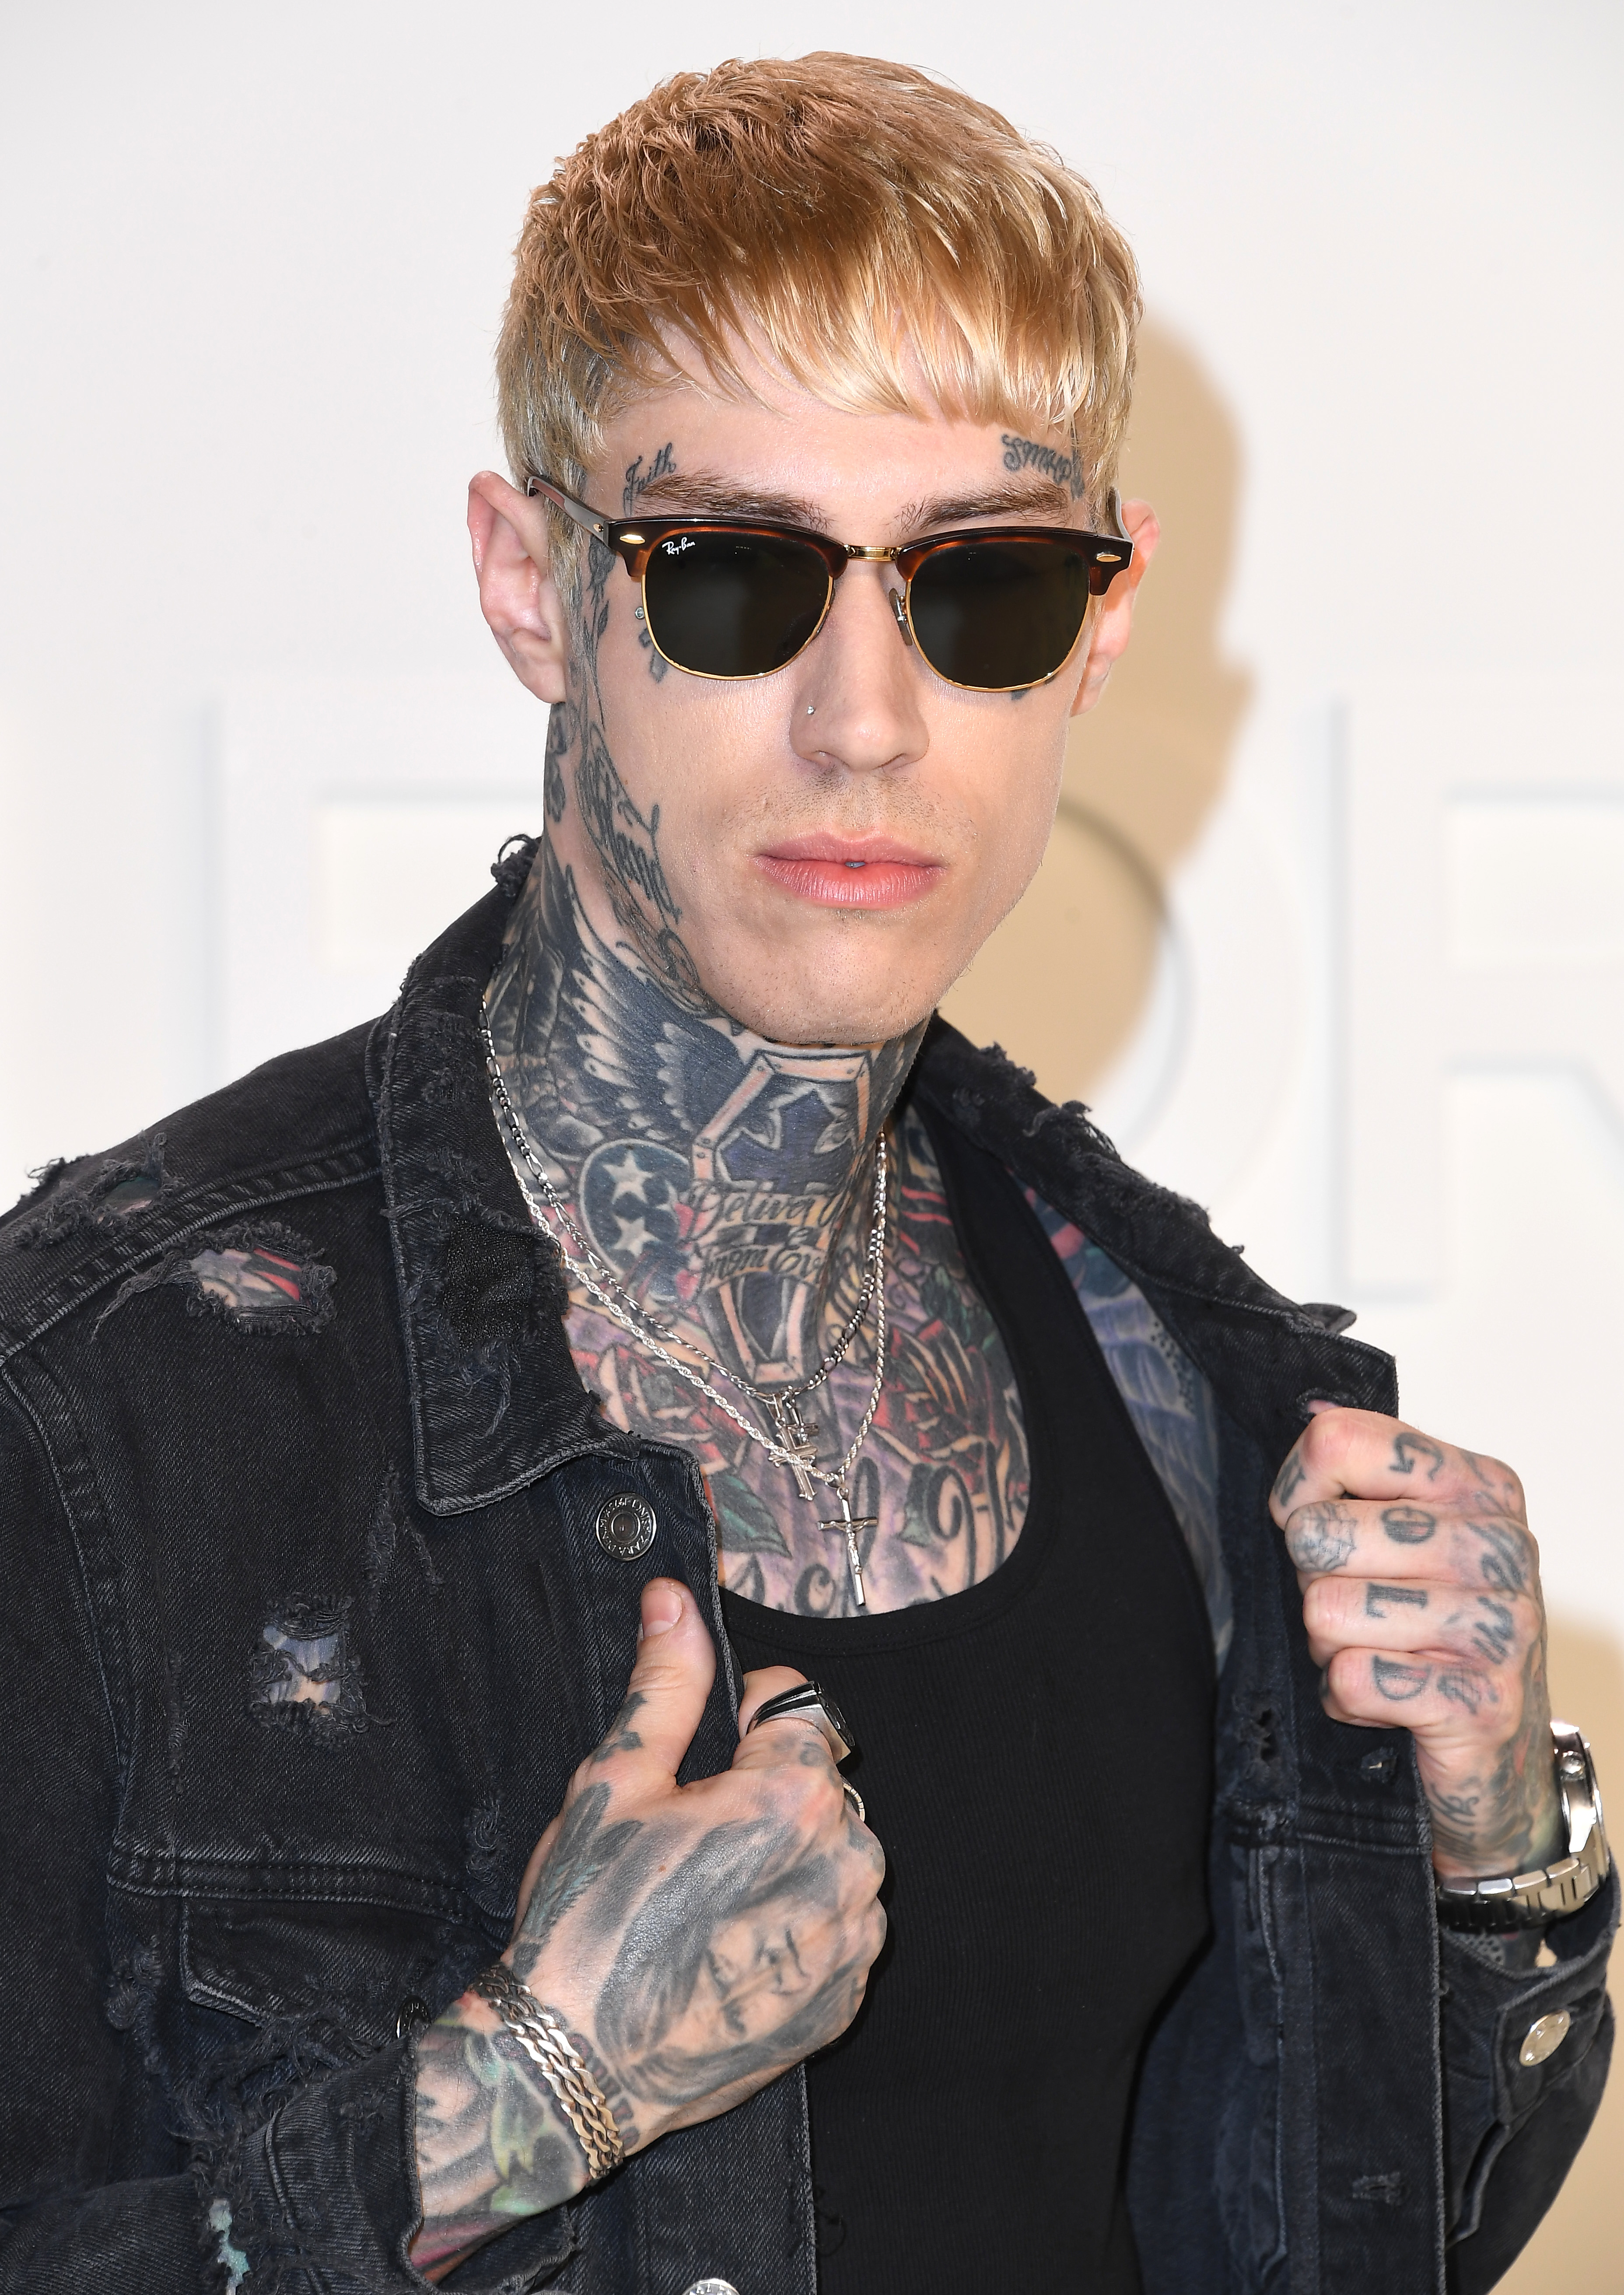 Close-up of Trace at a media event wearing sunglasses and showing many tattoos